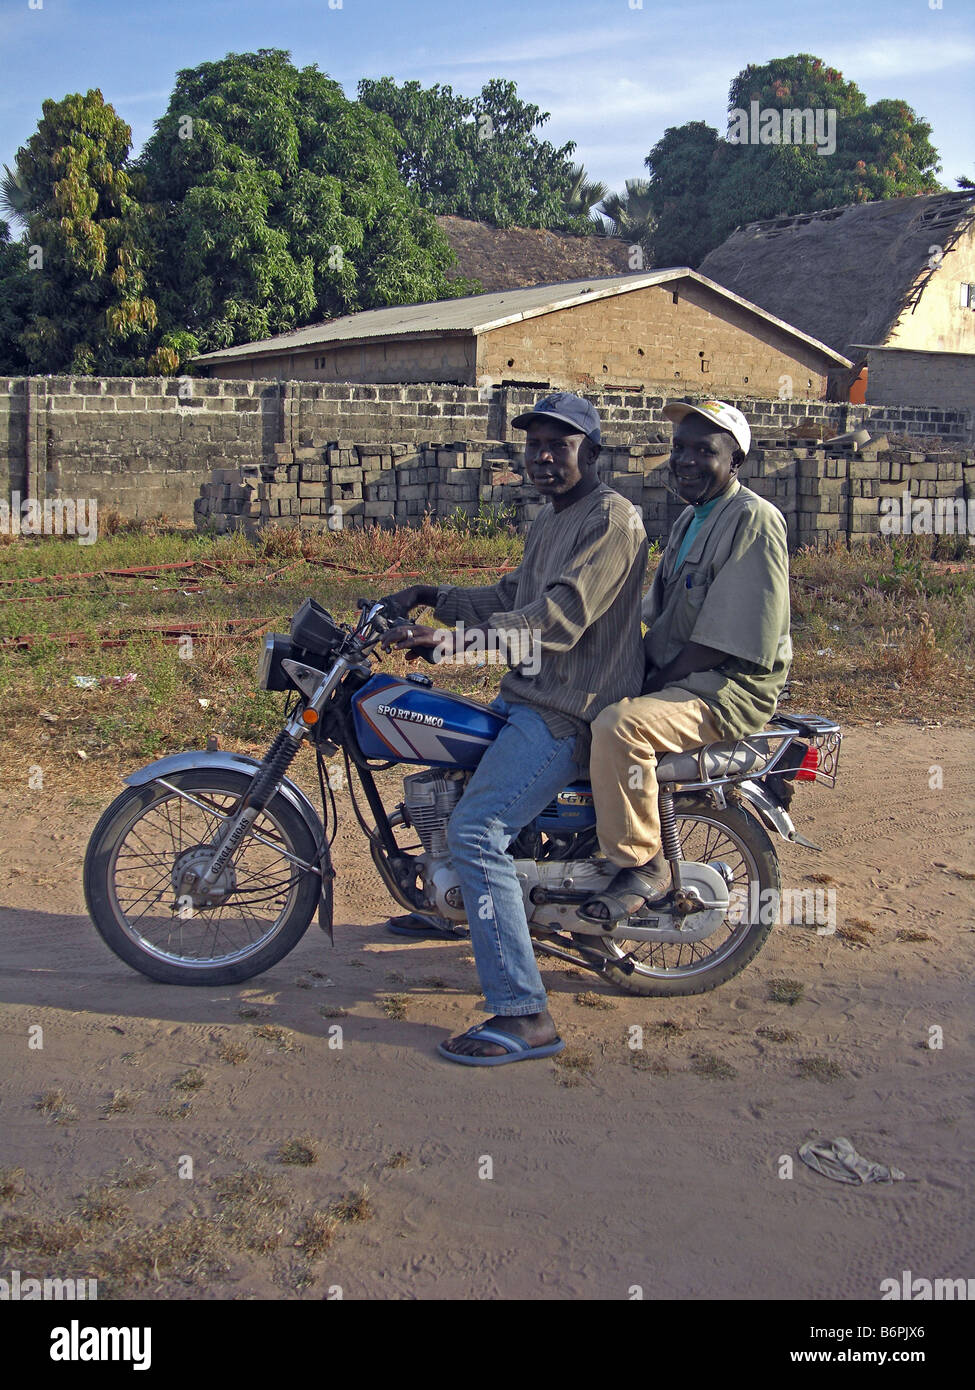 Two men on a motobike with no helmets in The Gambia, West africa. Stock Photo